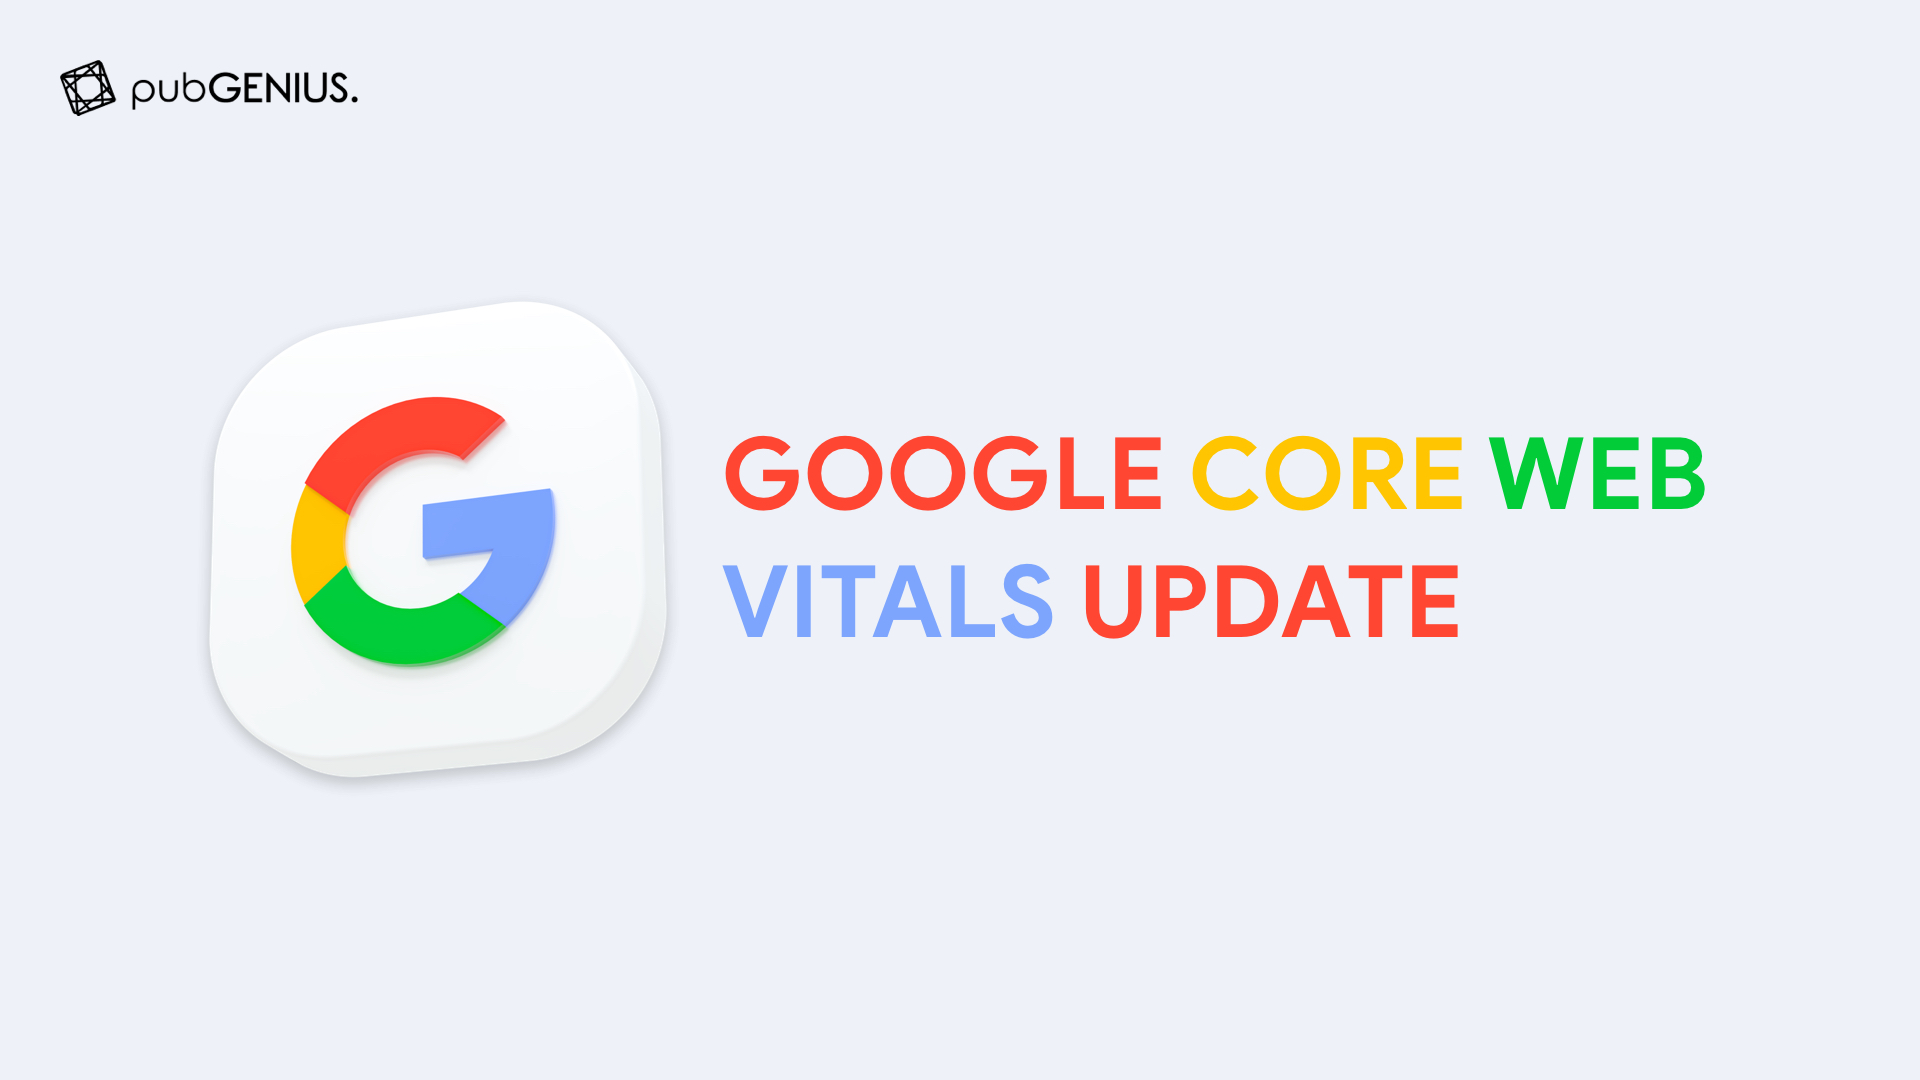 Google Core Web Vitals Update Article to talk about what is new in 2021